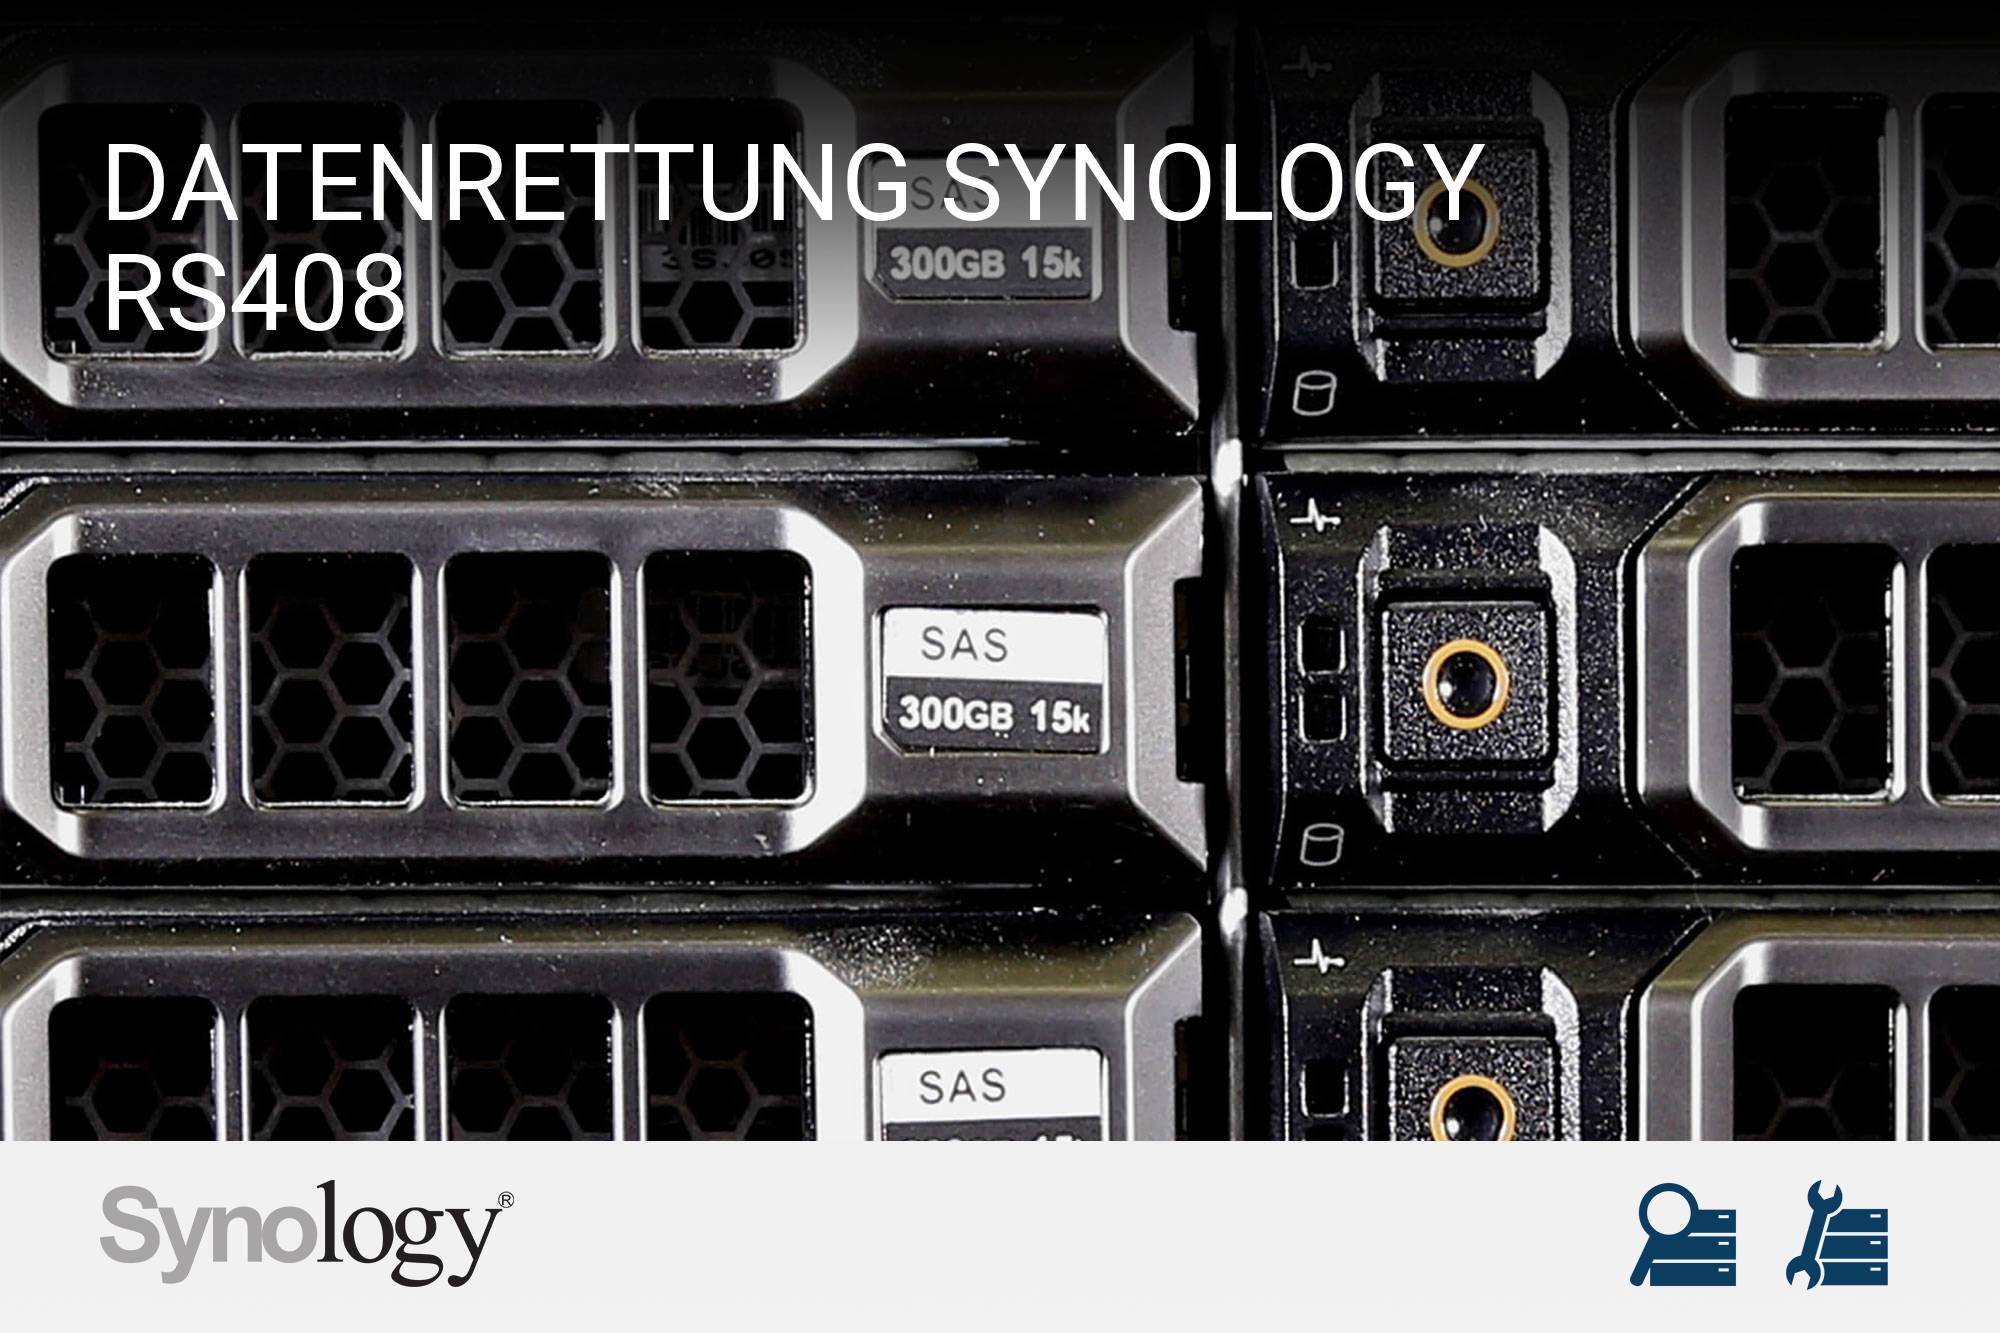 Synology RS408